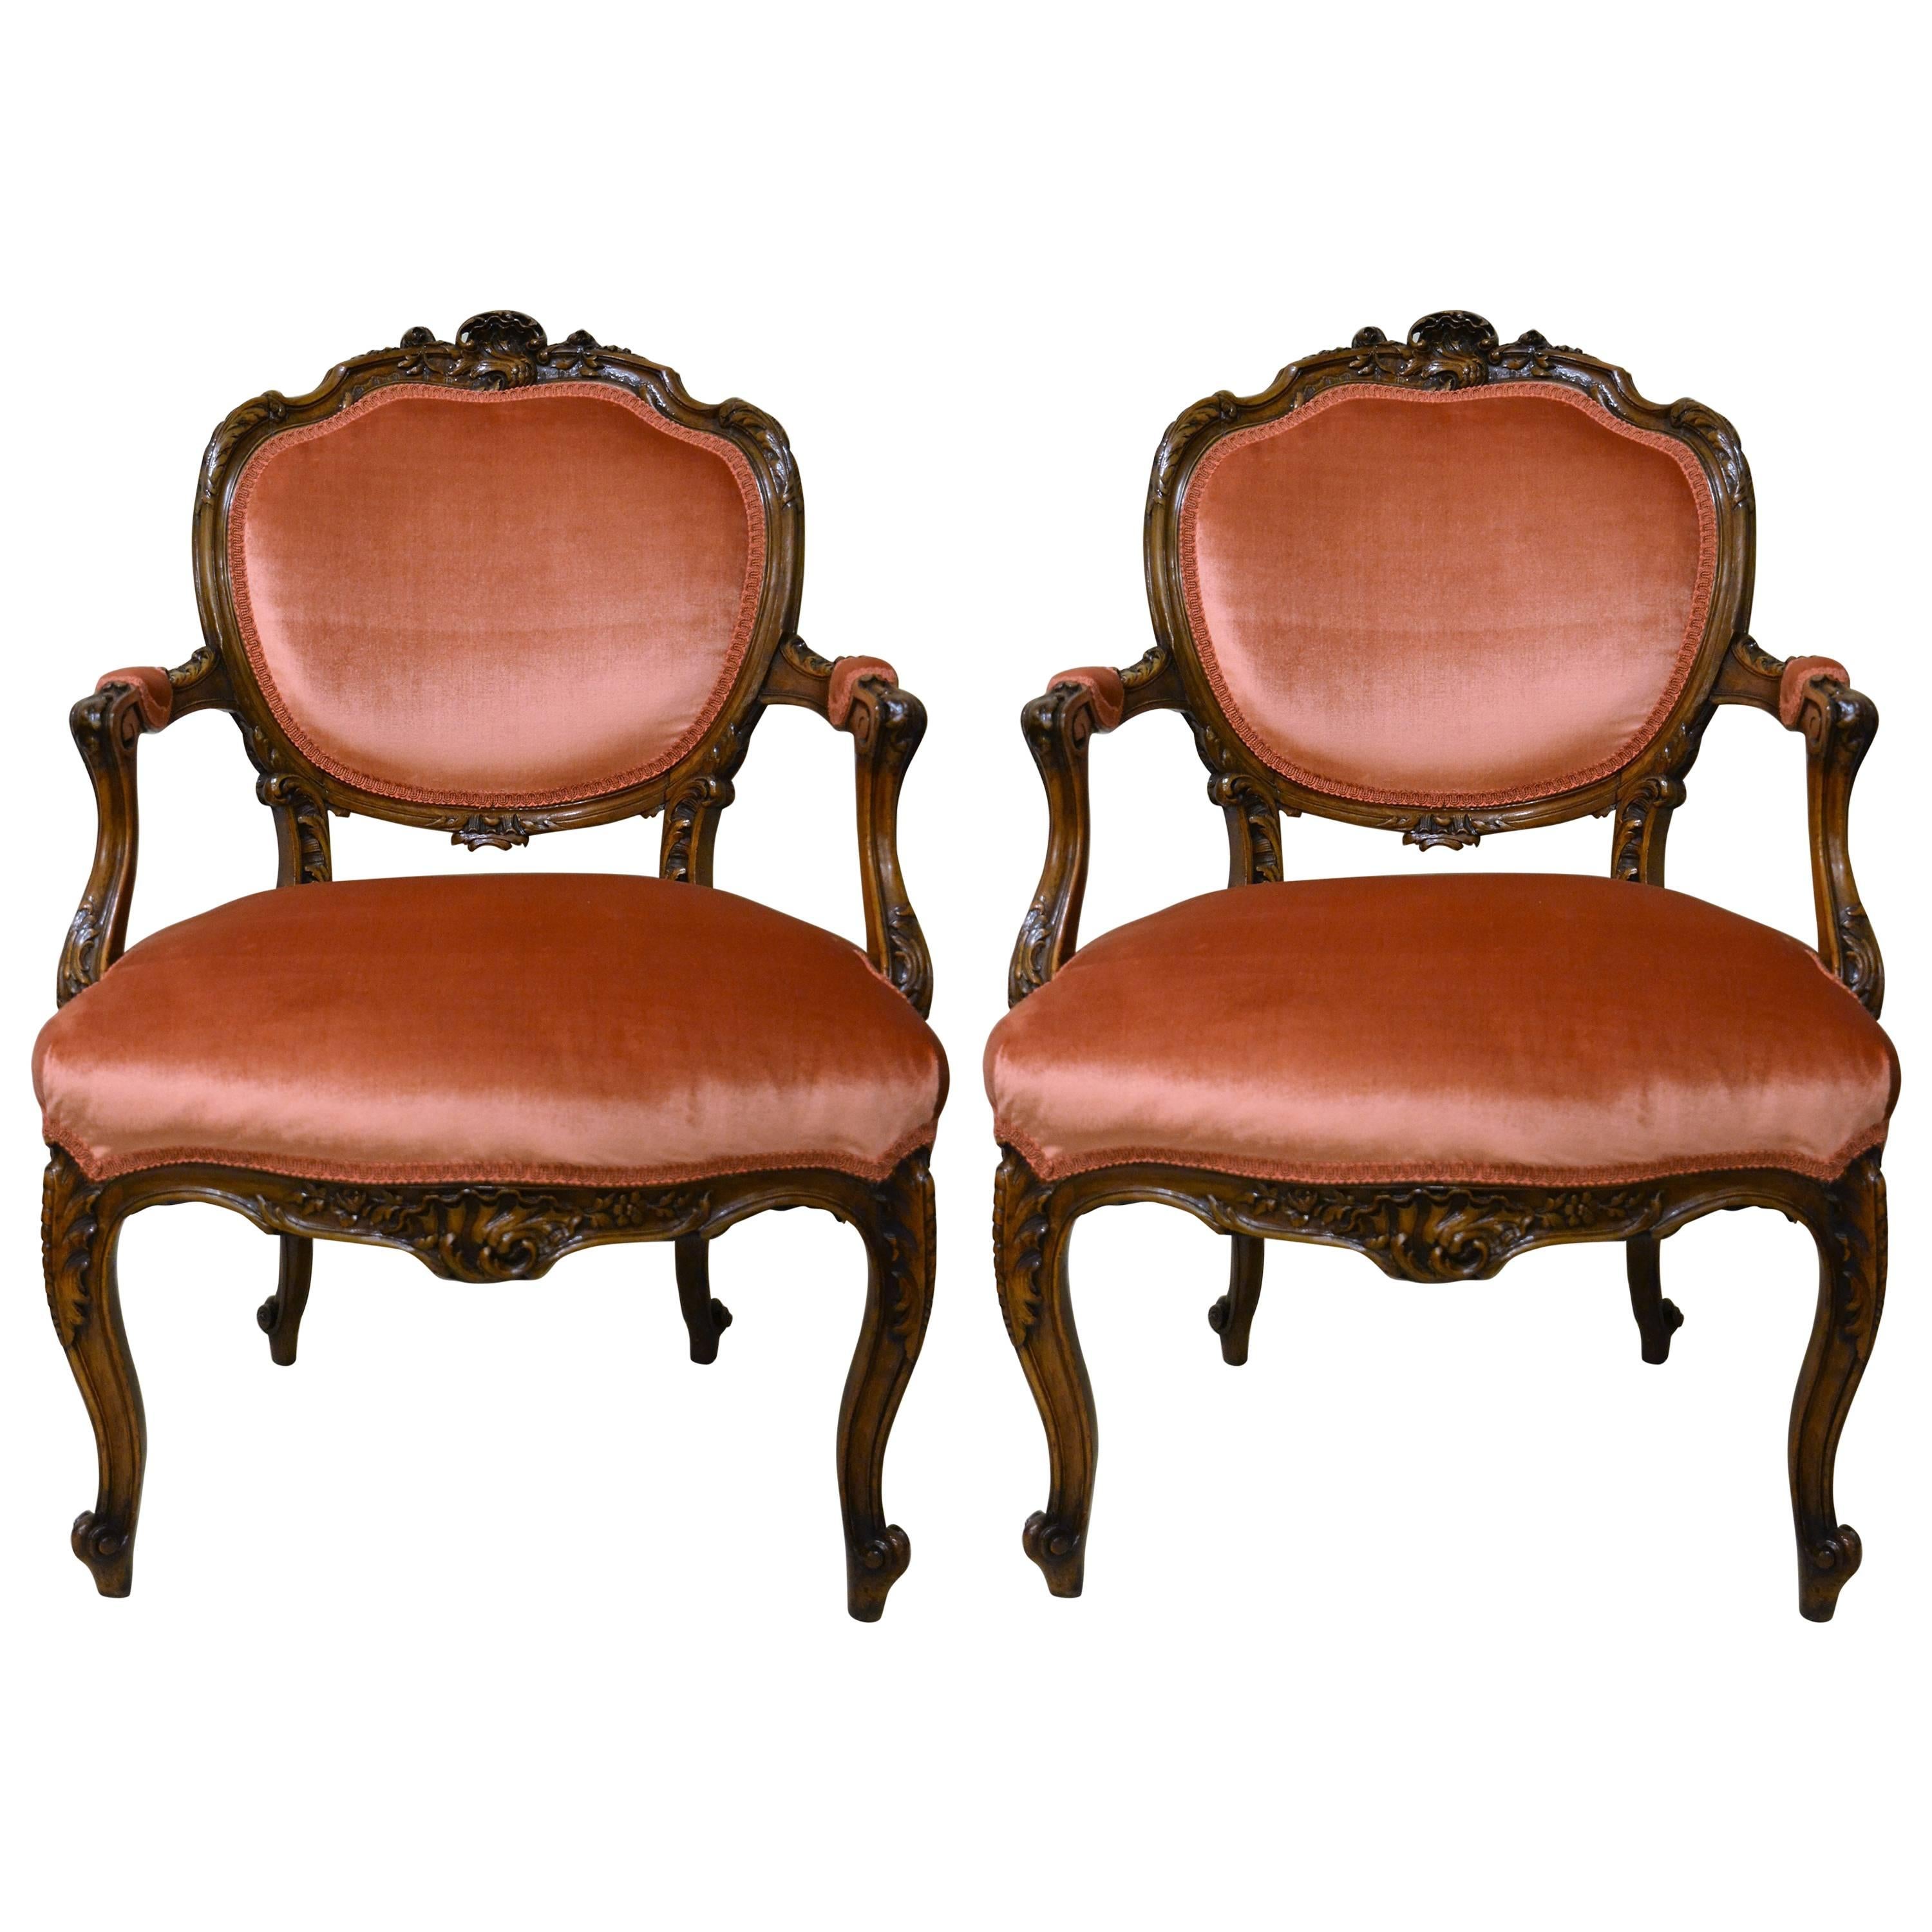 Pair of Antique French Sculpted Walnut Armchairs